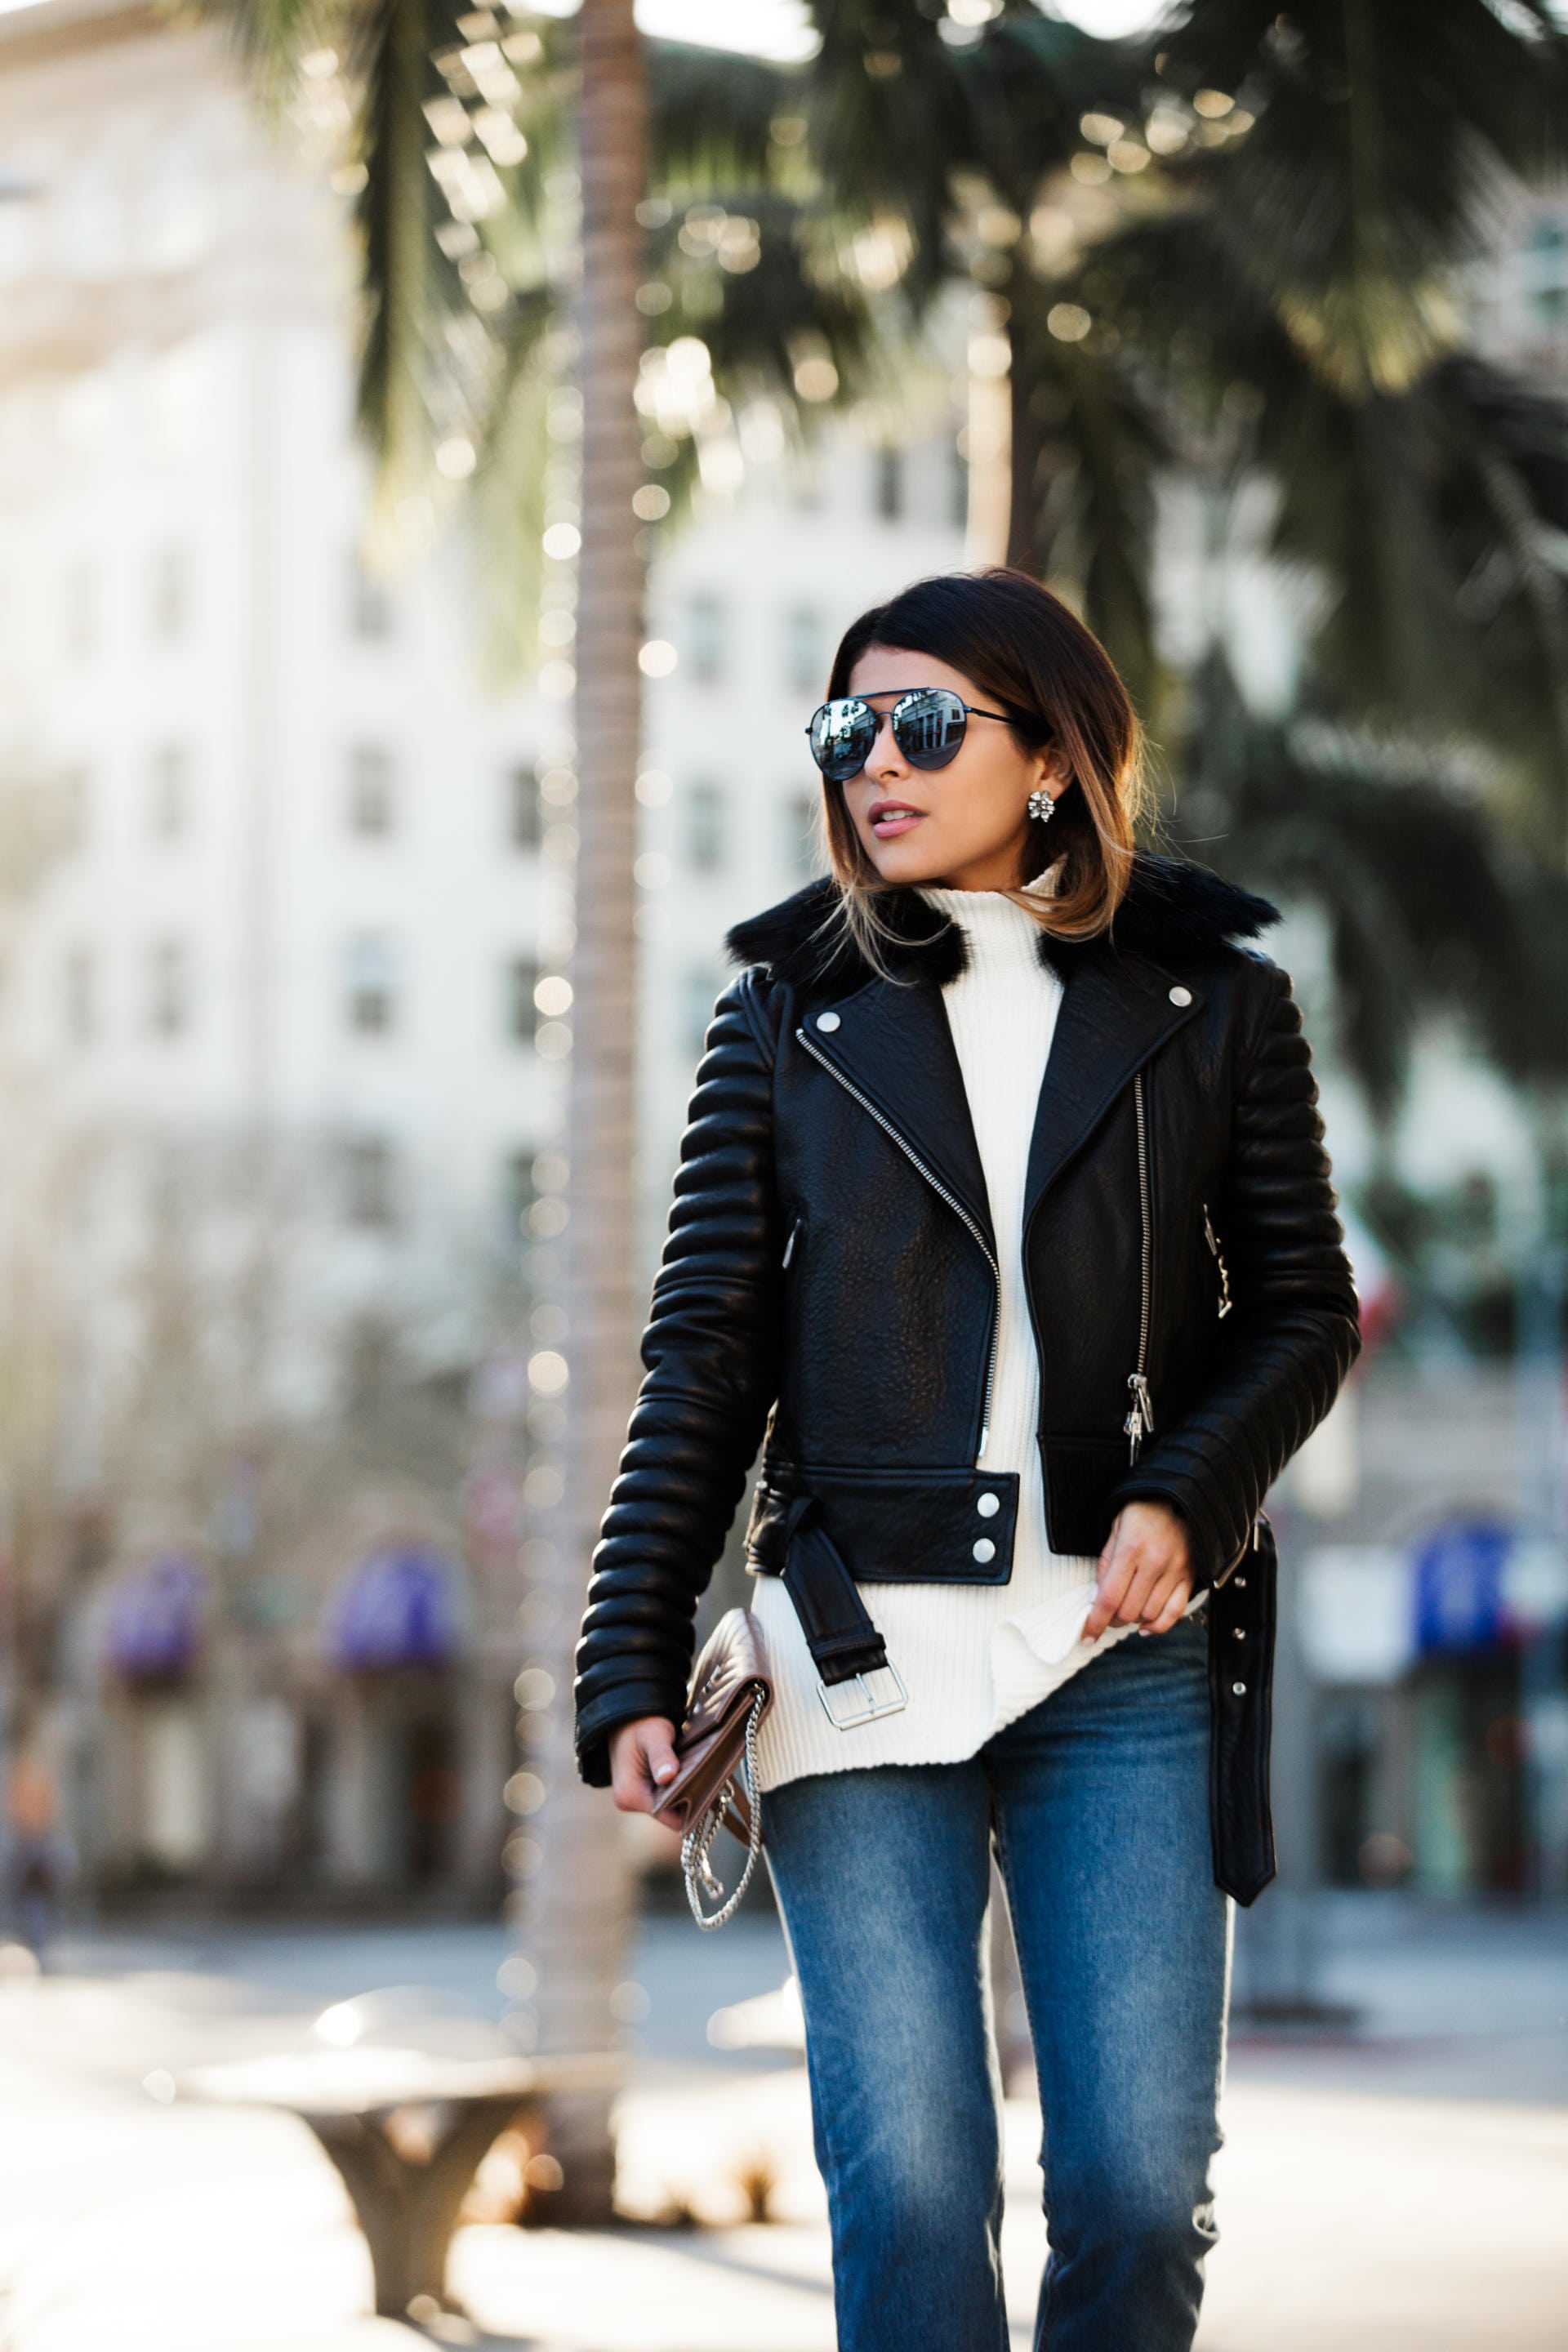 Leather Jacket, Jeans, Black Pumps, Winter Inspired Look | The Girl From Panama